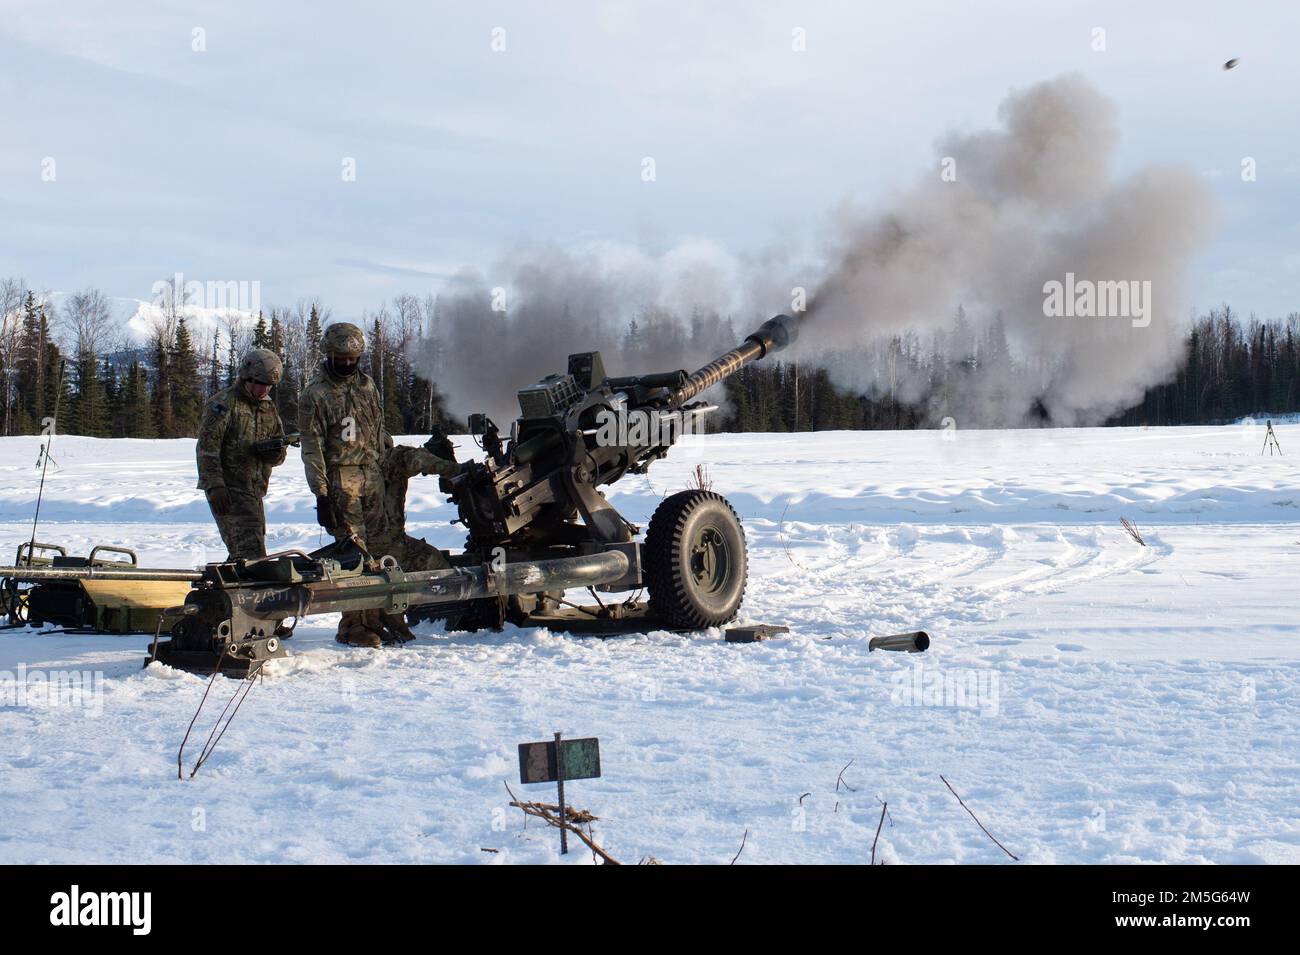 U.S. Army paratroopers assigned to Bravo Battery, 2nd Battalion, 377th Parachute Field Artillery Regiment, 4th Infantry Brigade Combat Team (Airborne), 25th Infantry Division, U.S. Army Alaska, fire the M119 105 mm howitzer during live-fire artillery training at Joint Base Elmendorf-Richardson, Alaska, March 16, 2022. The Soldiers of 4/25 belong to the only American airborne brigade in the Pacific and are trained to execute airborne maneuvers in extreme cold weather and high altitude environments in support of combat, partnership and disaster relief operations. Stock Photo